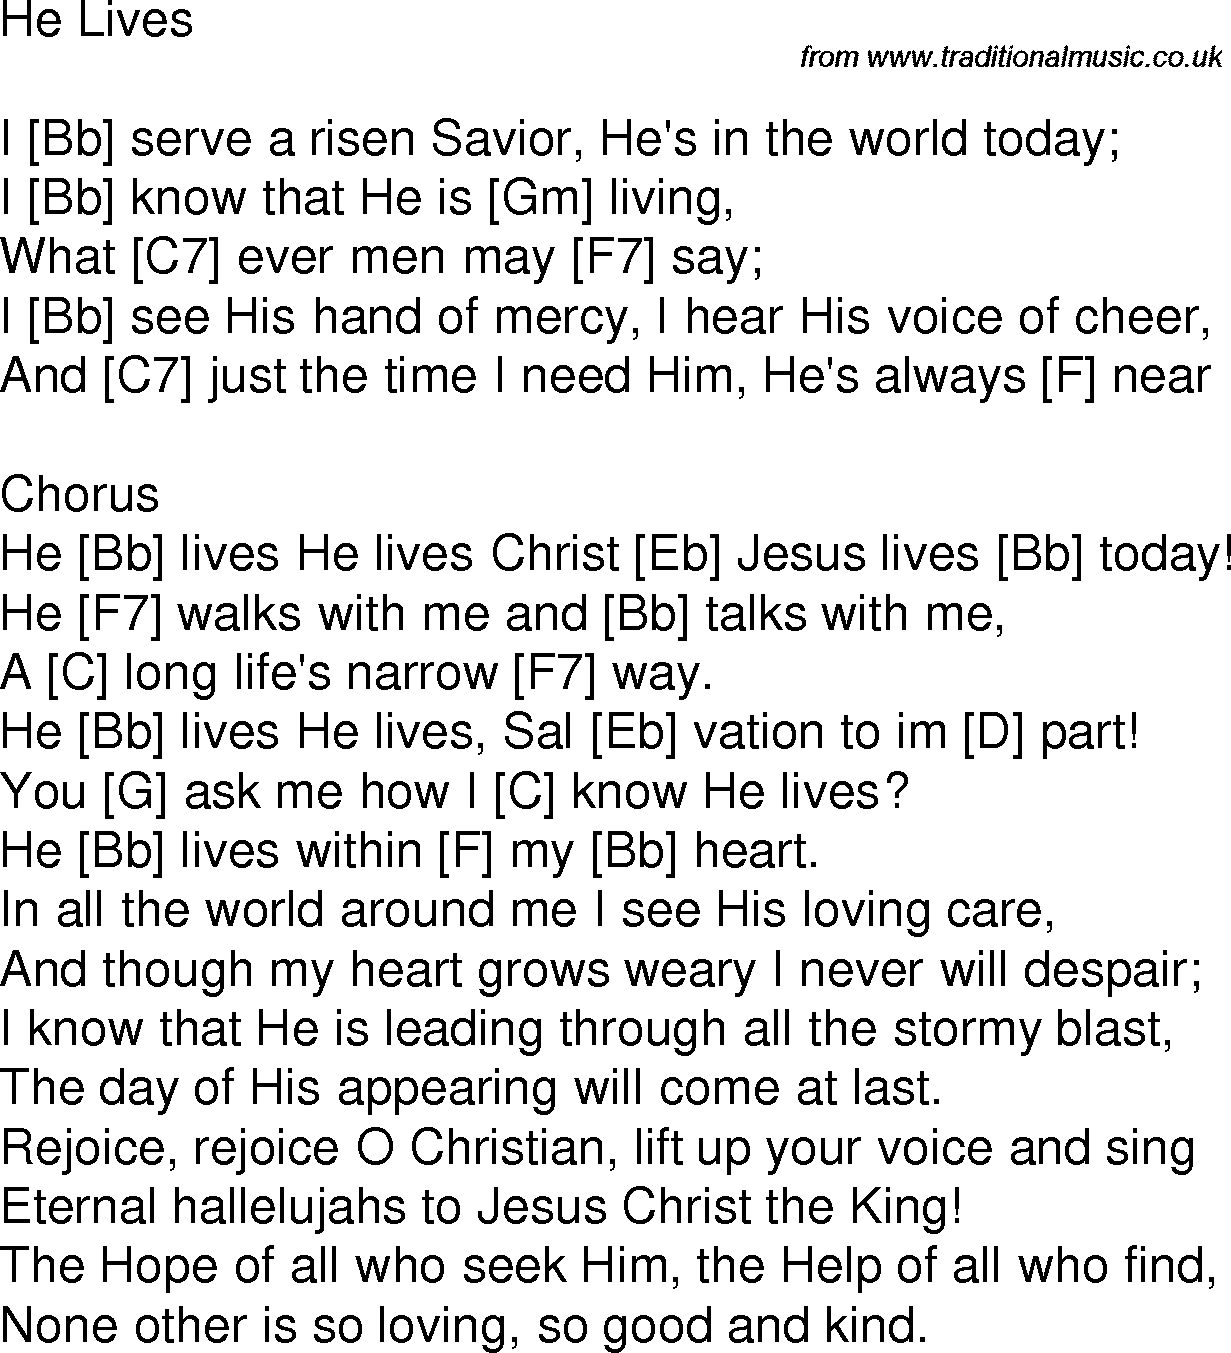 Old time song lyrics with chords for He Lives Bb